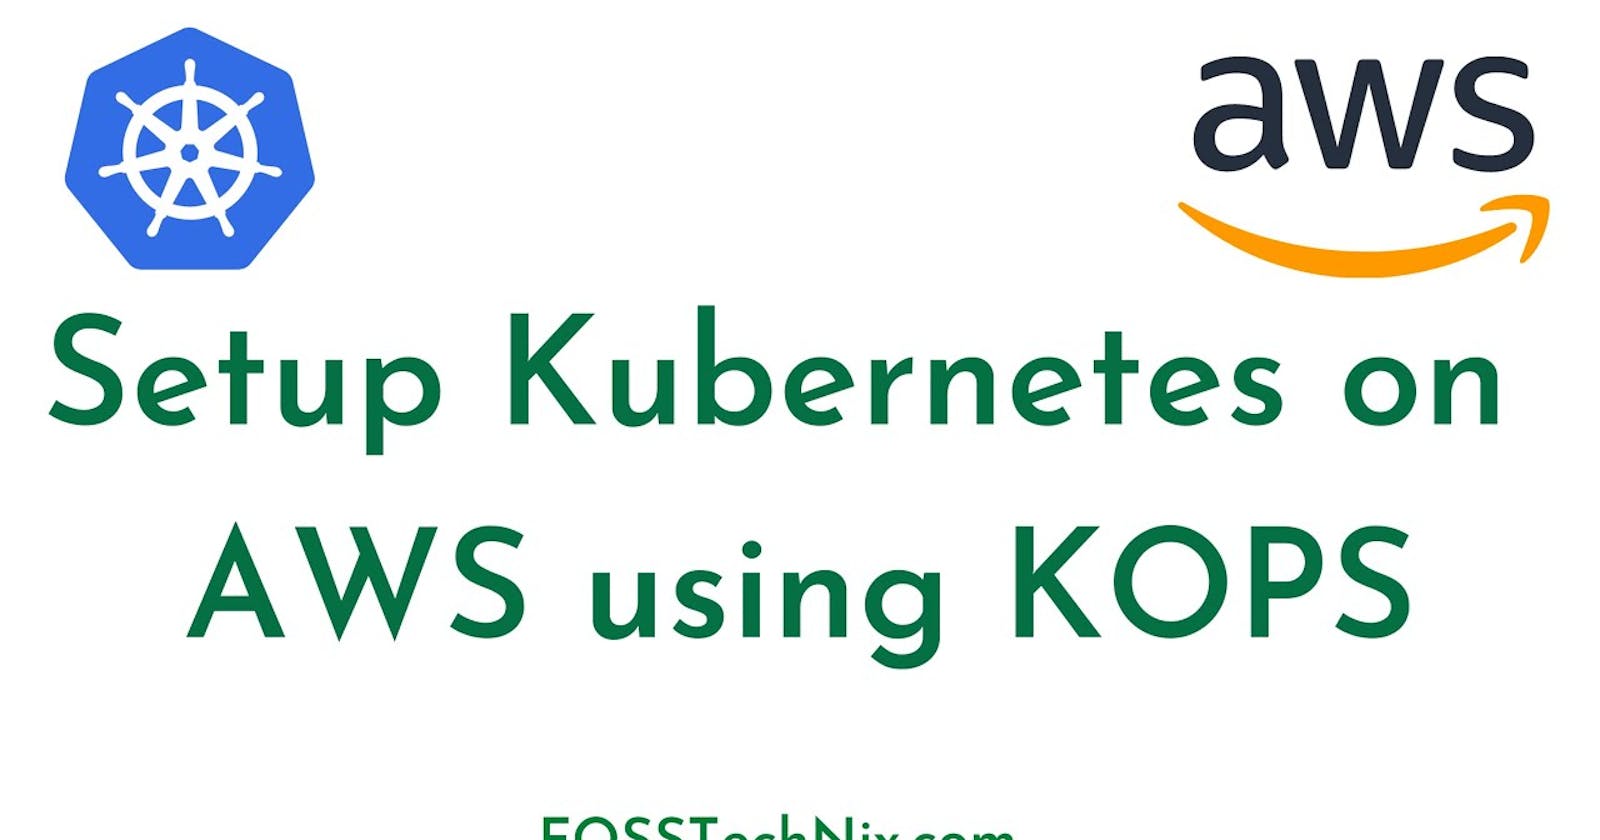 Kubernetes Made Easy: A Step-by-Step Guide to Installing KOPS on EC2